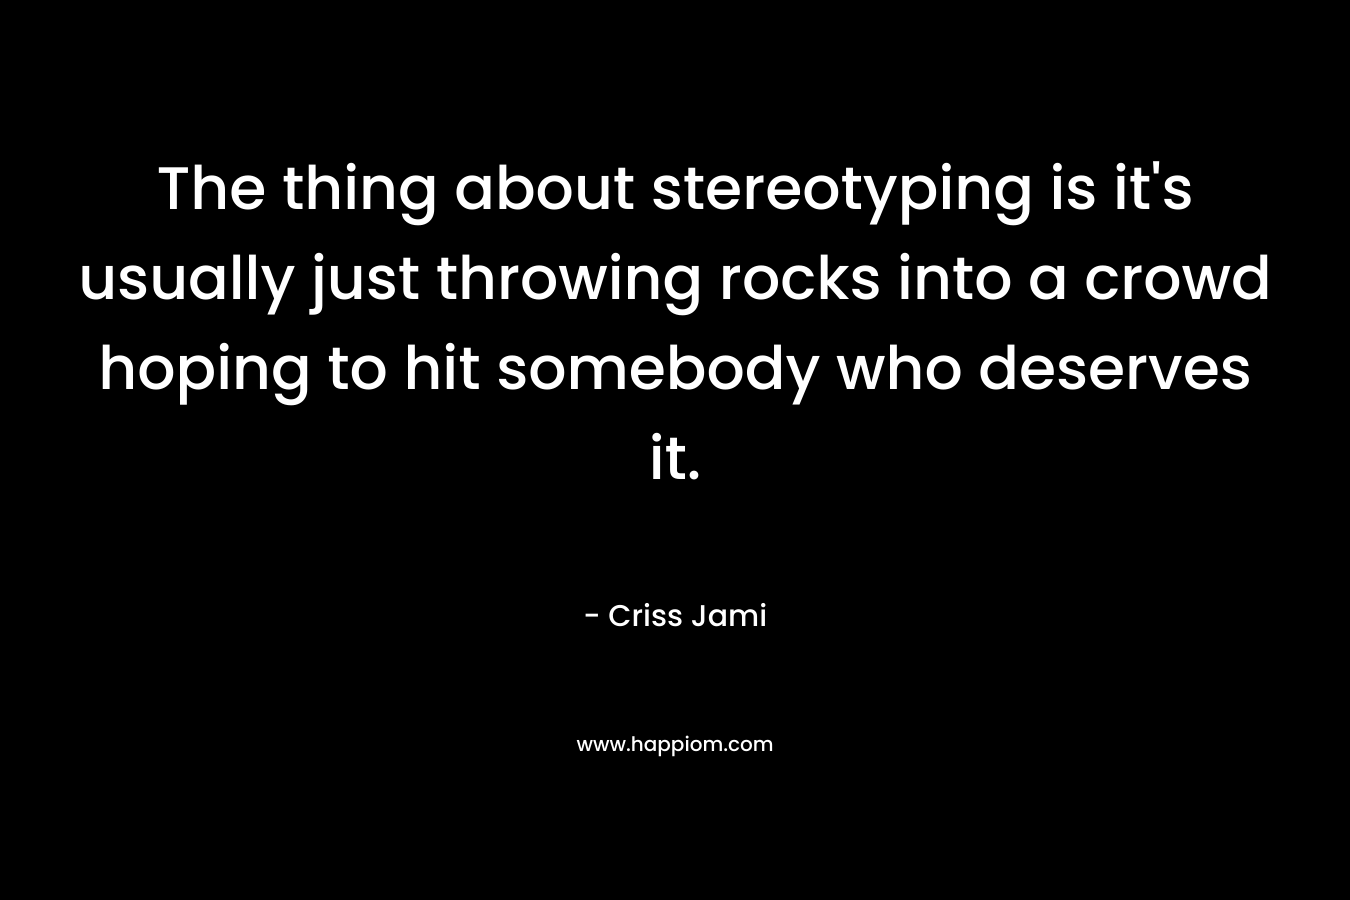 The thing about stereotyping is it’s usually just throwing rocks into a crowd hoping to hit somebody who deserves it. – Criss Jami